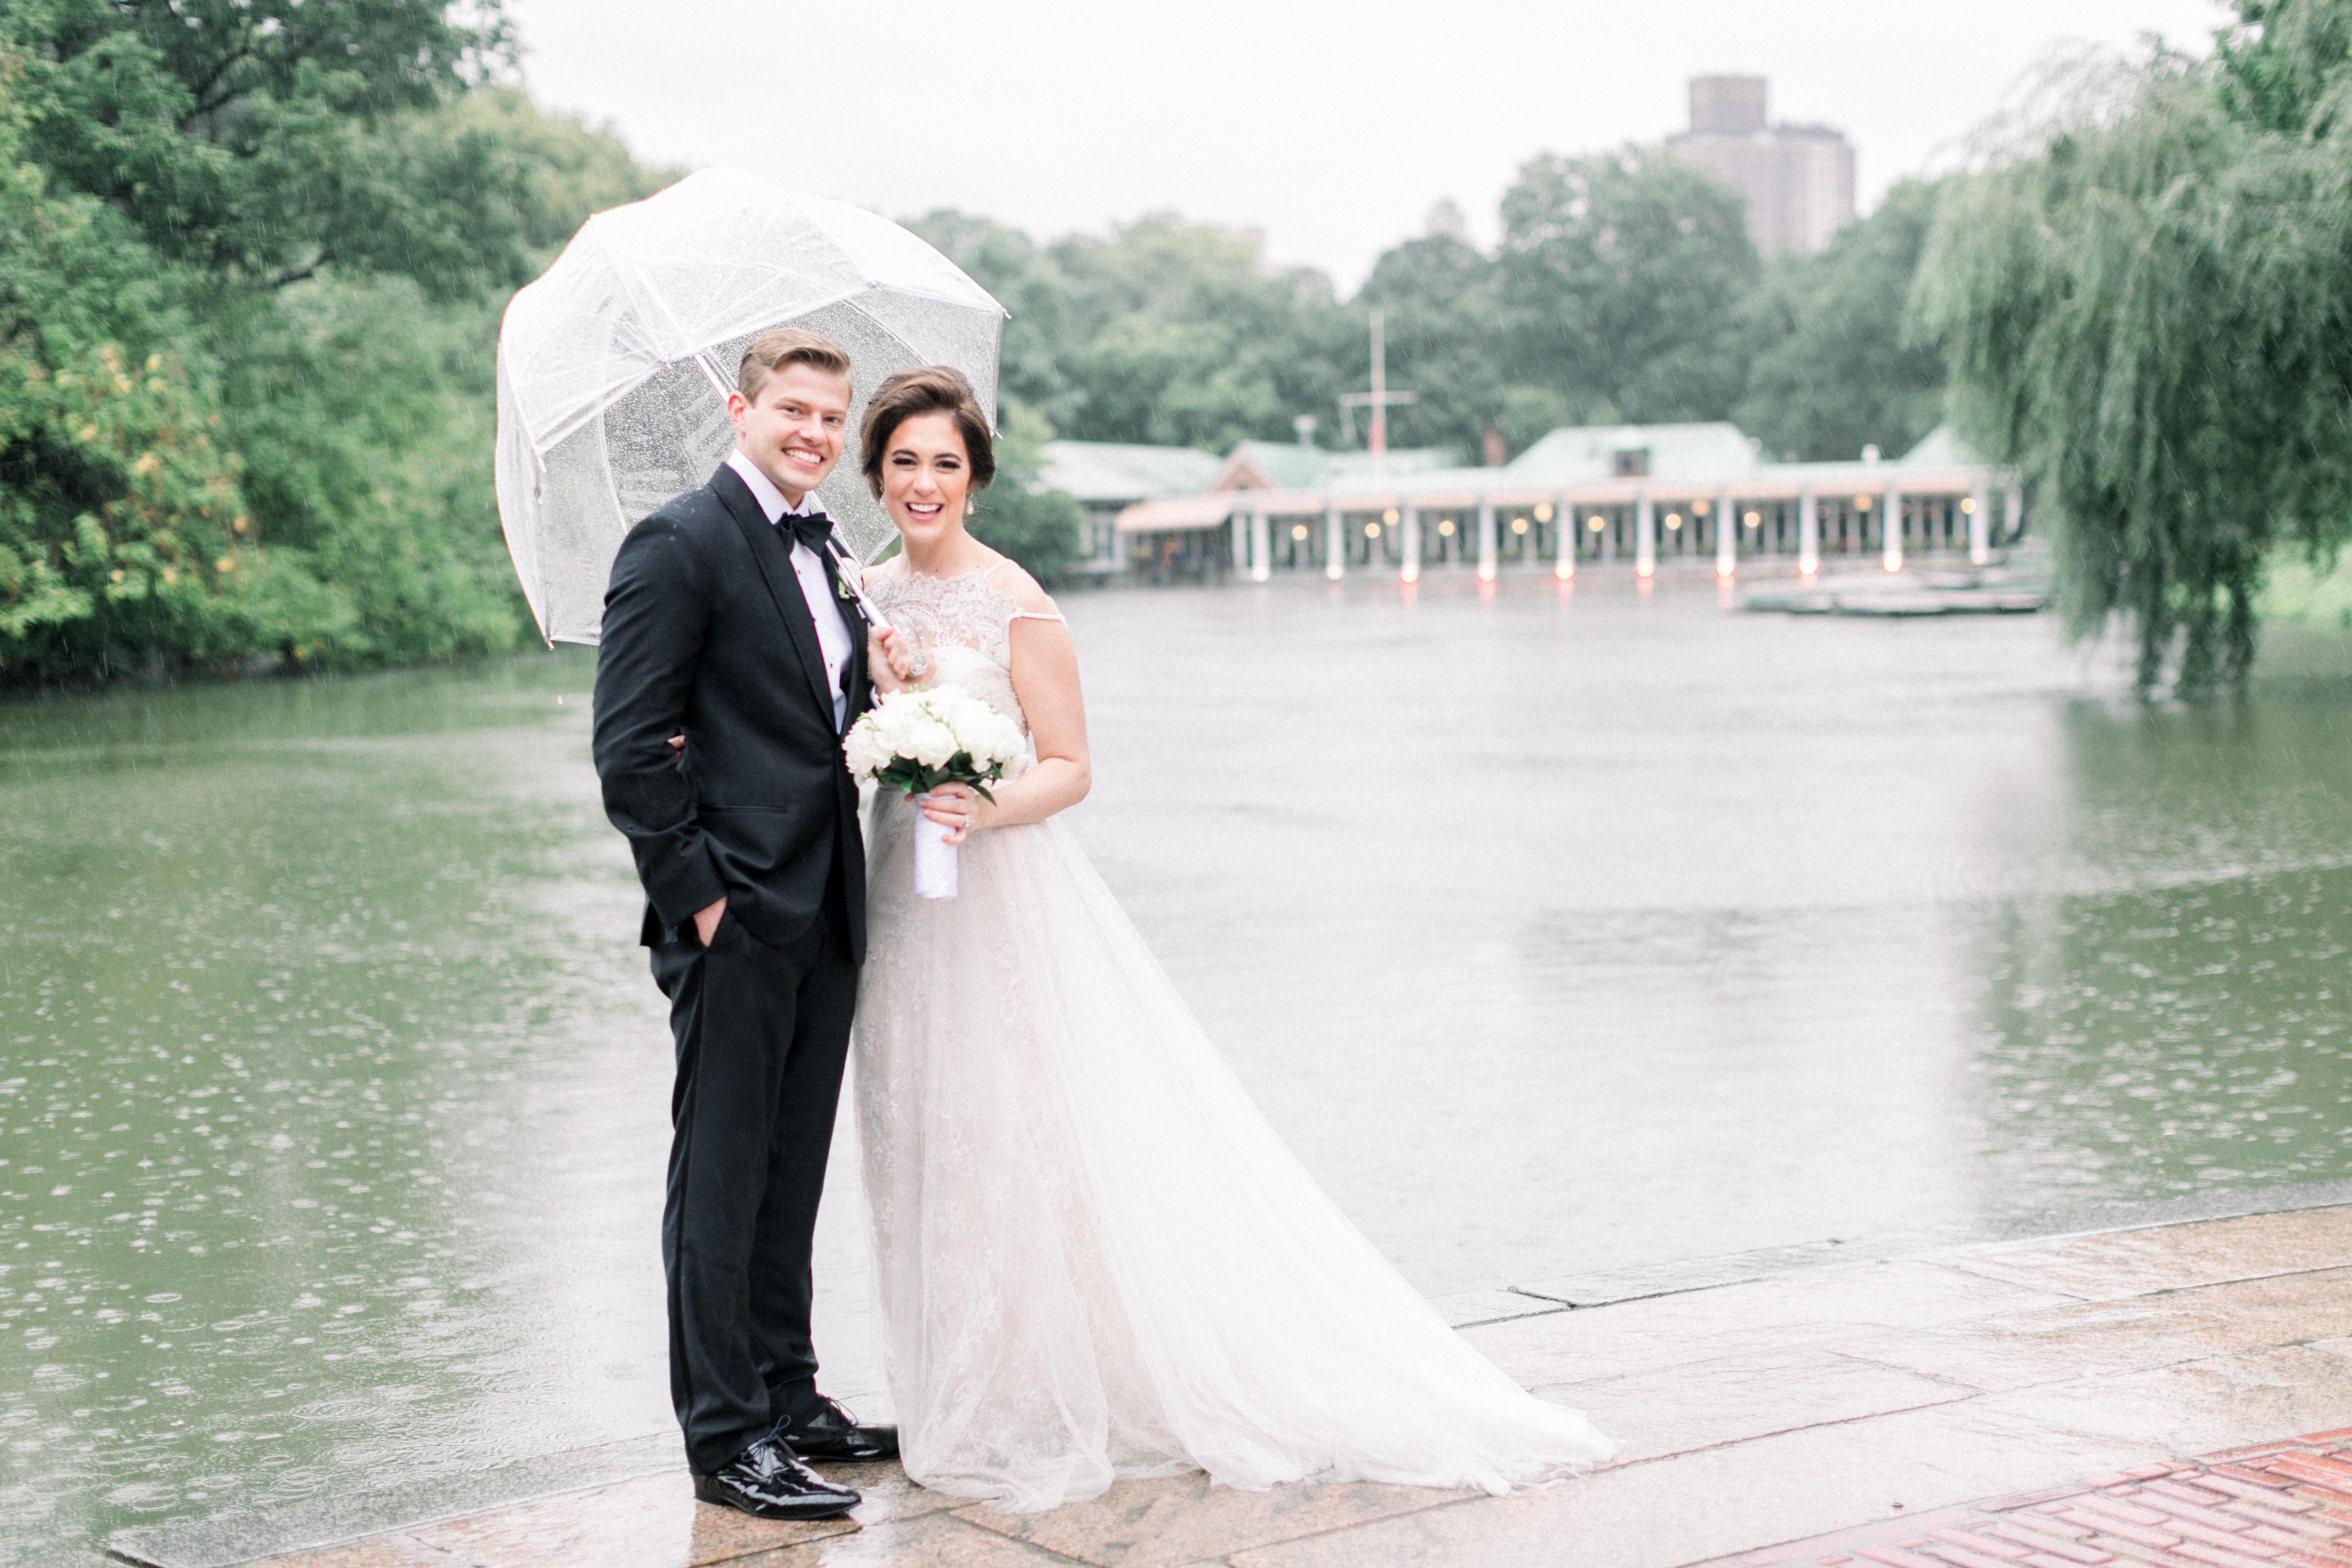 Rain Made The Star Of Wicked on Broadway’s NYC Wedding Even More Romantic!